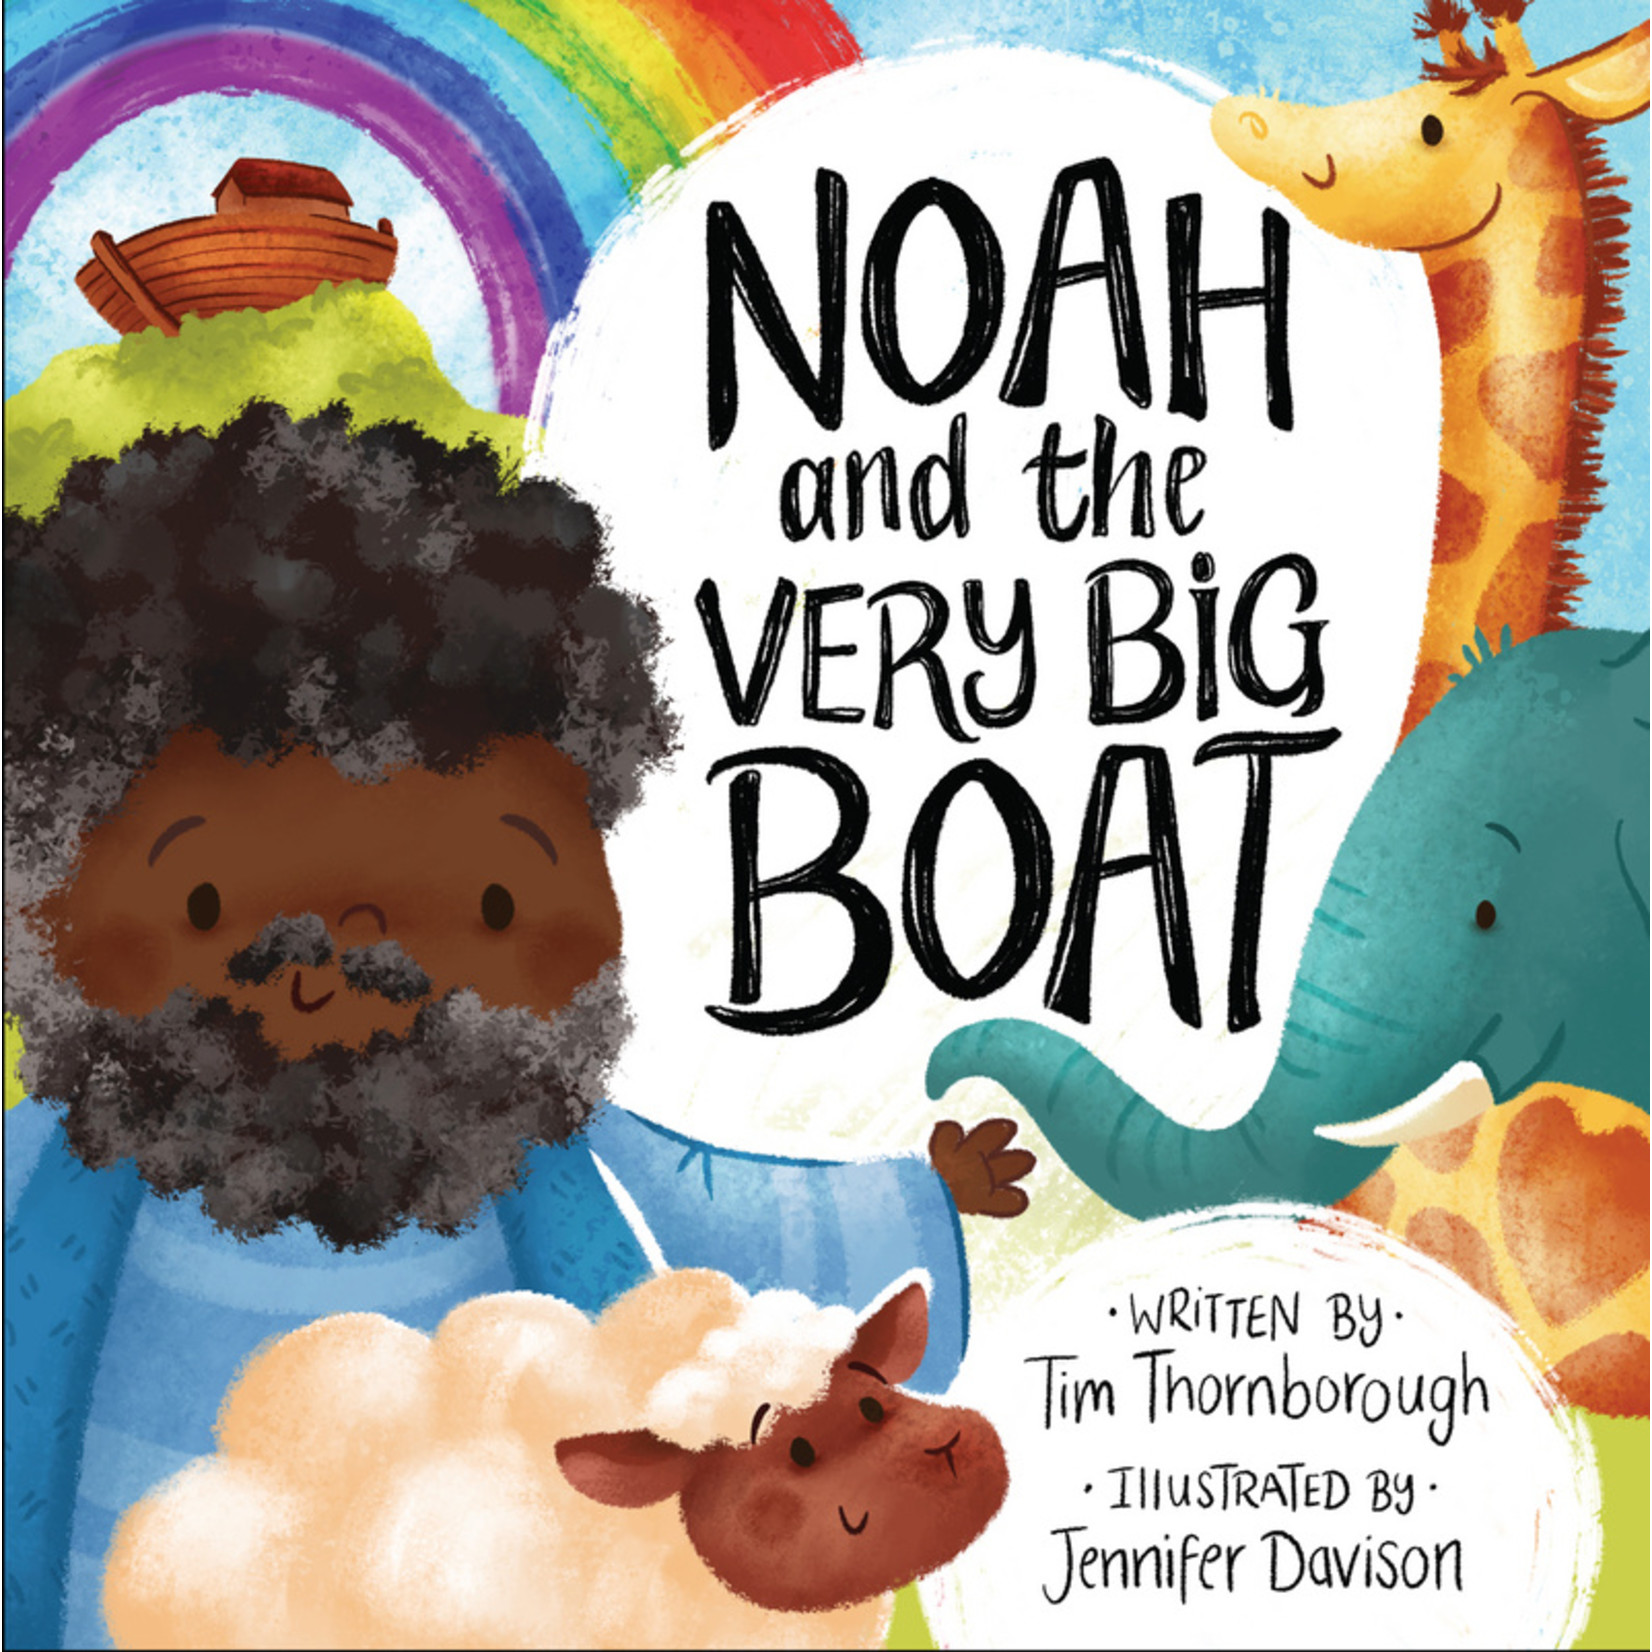 The Good Book Company Noah and the Very Big Boat